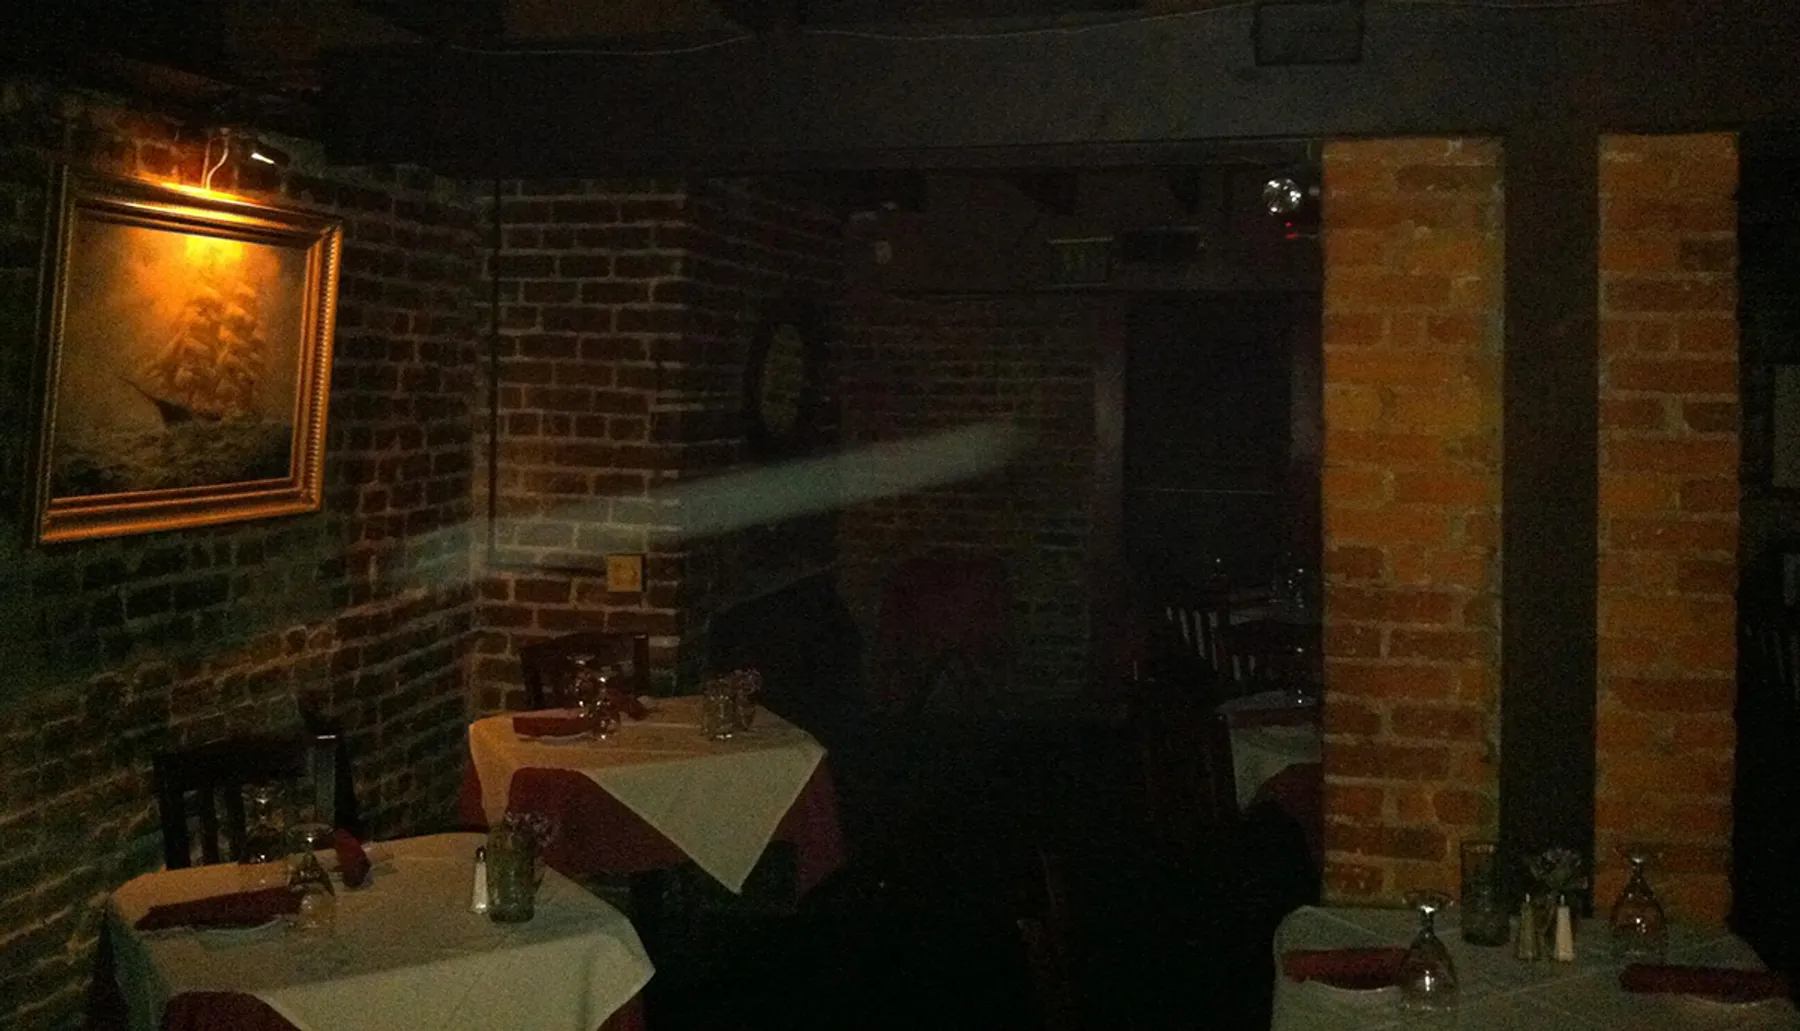 This image portrays a dimly lit, seemingly empty restaurant with brick walls, framed artwork, and tables set for dining.